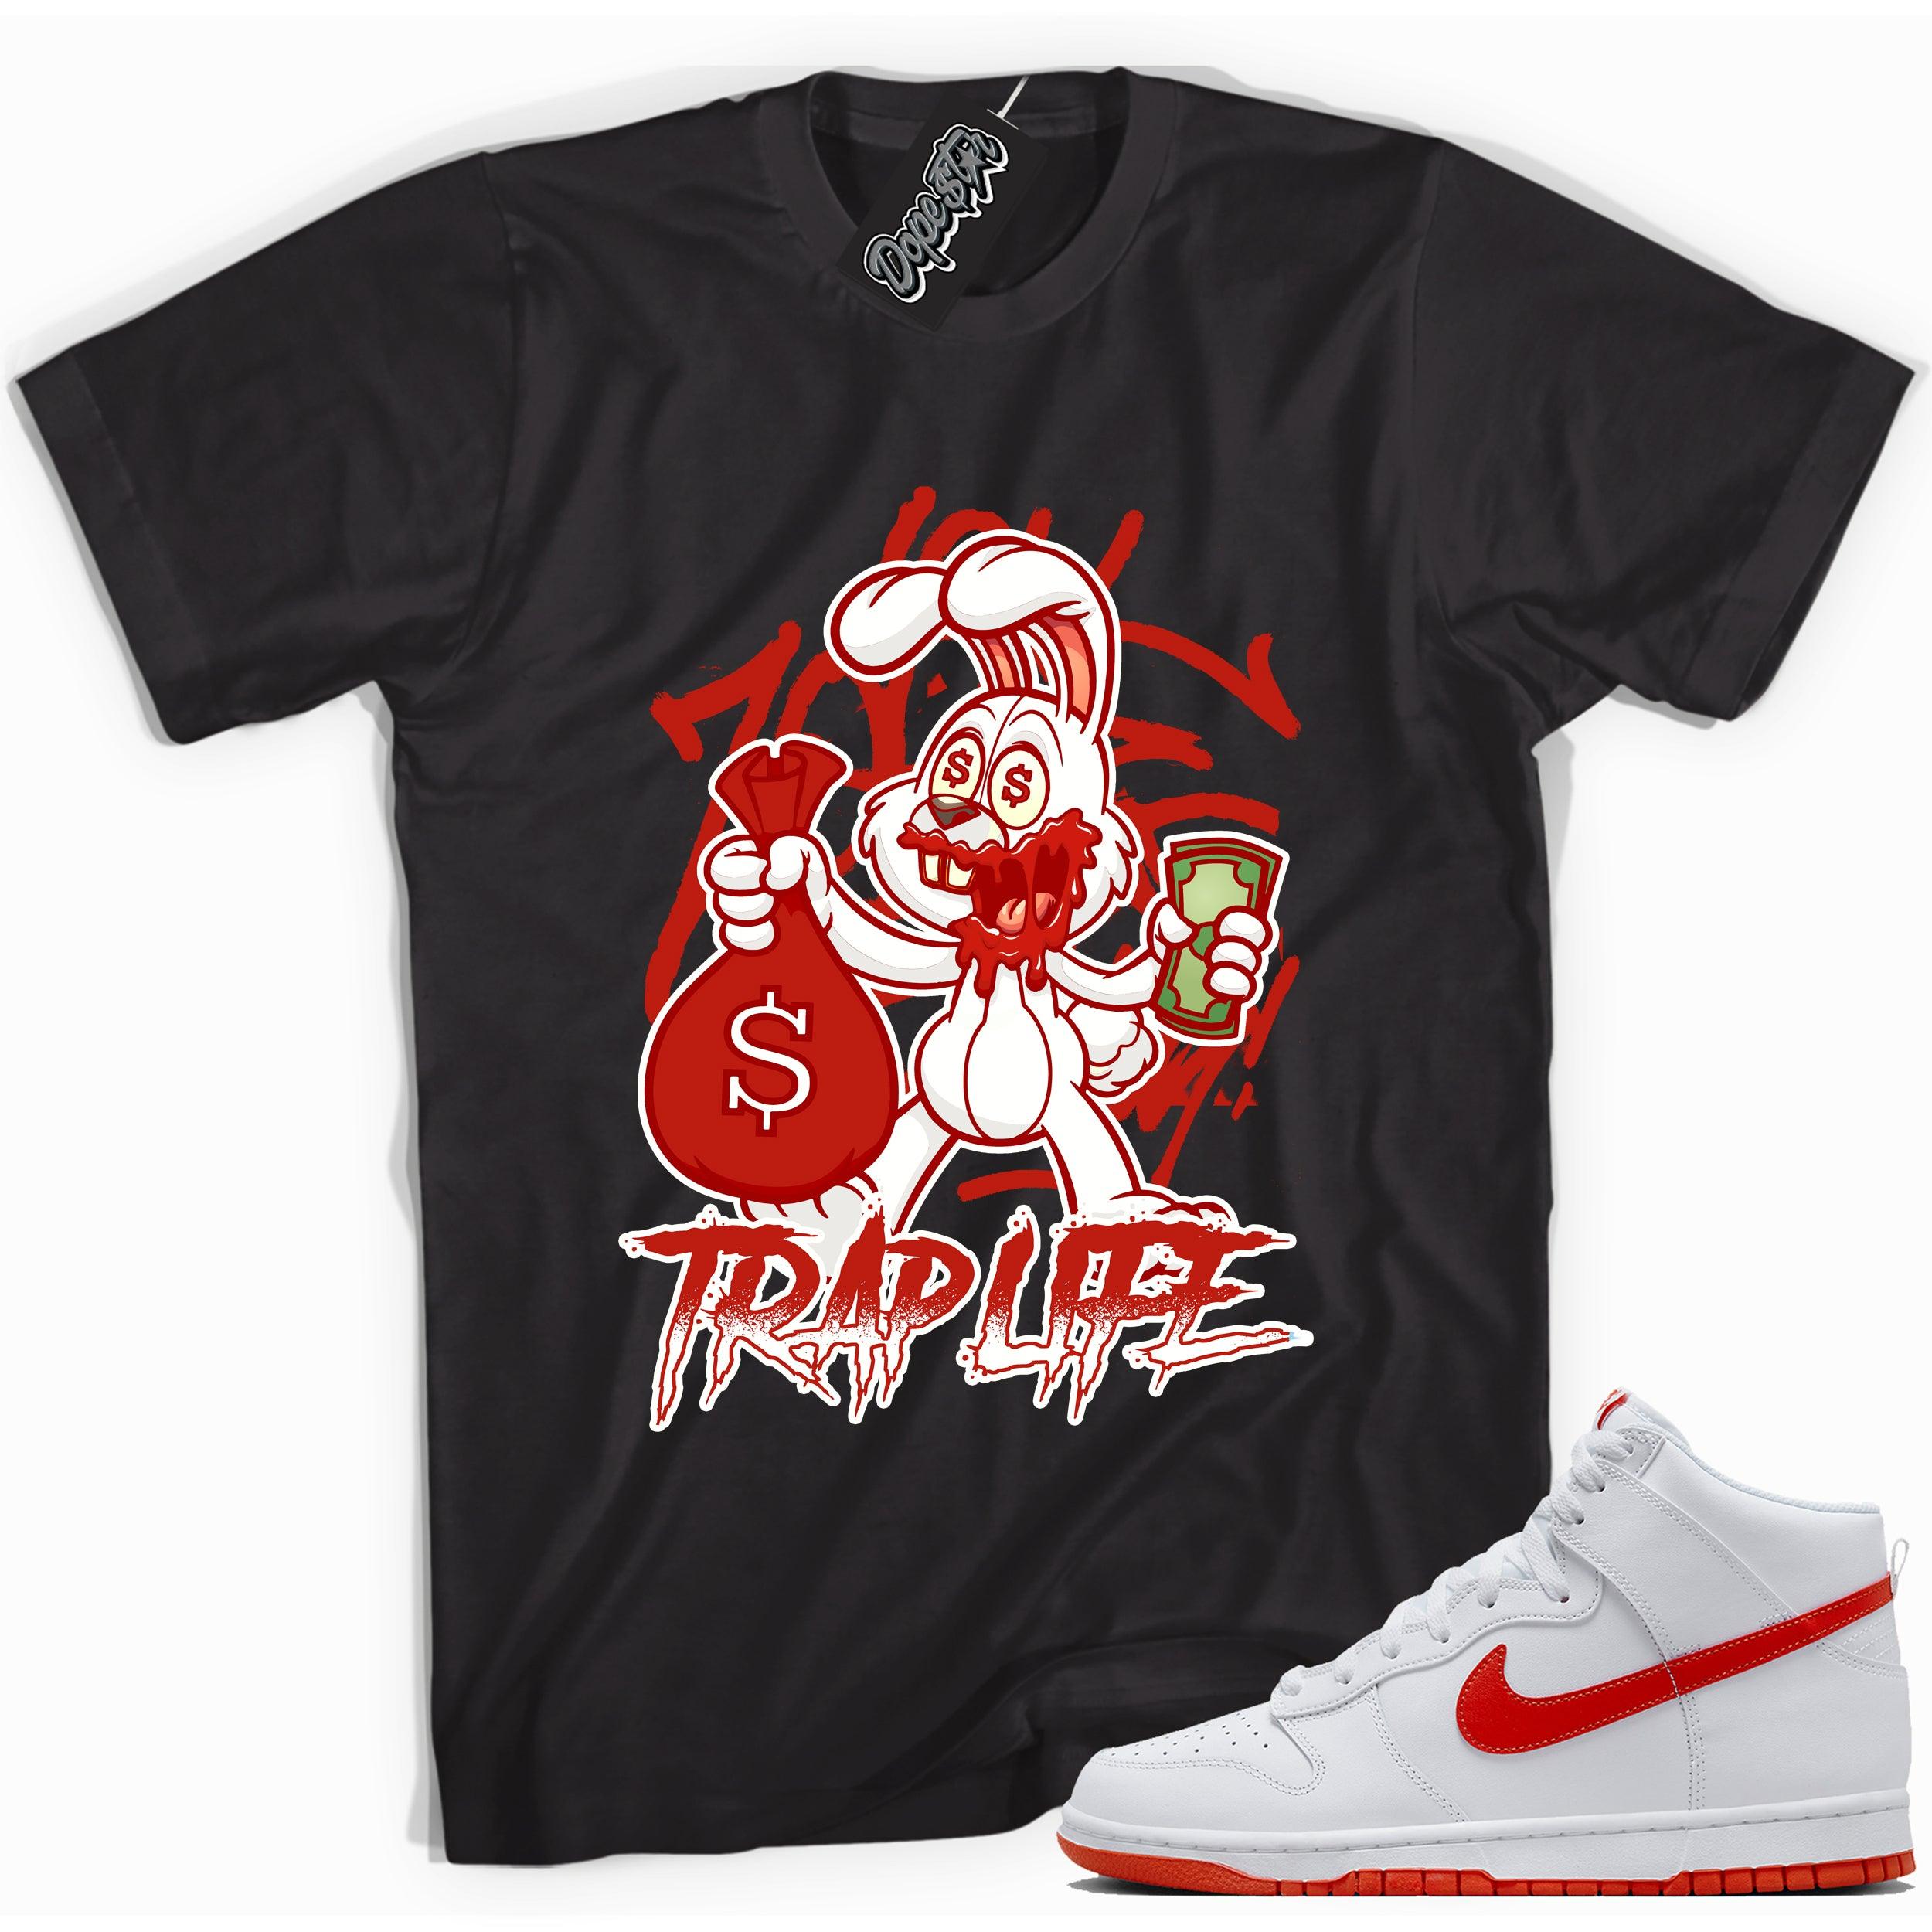 Cool black graphic tee with 'trap rabbit' print, that perfectly matches Nike Dunk High White Picante Red sneakers.